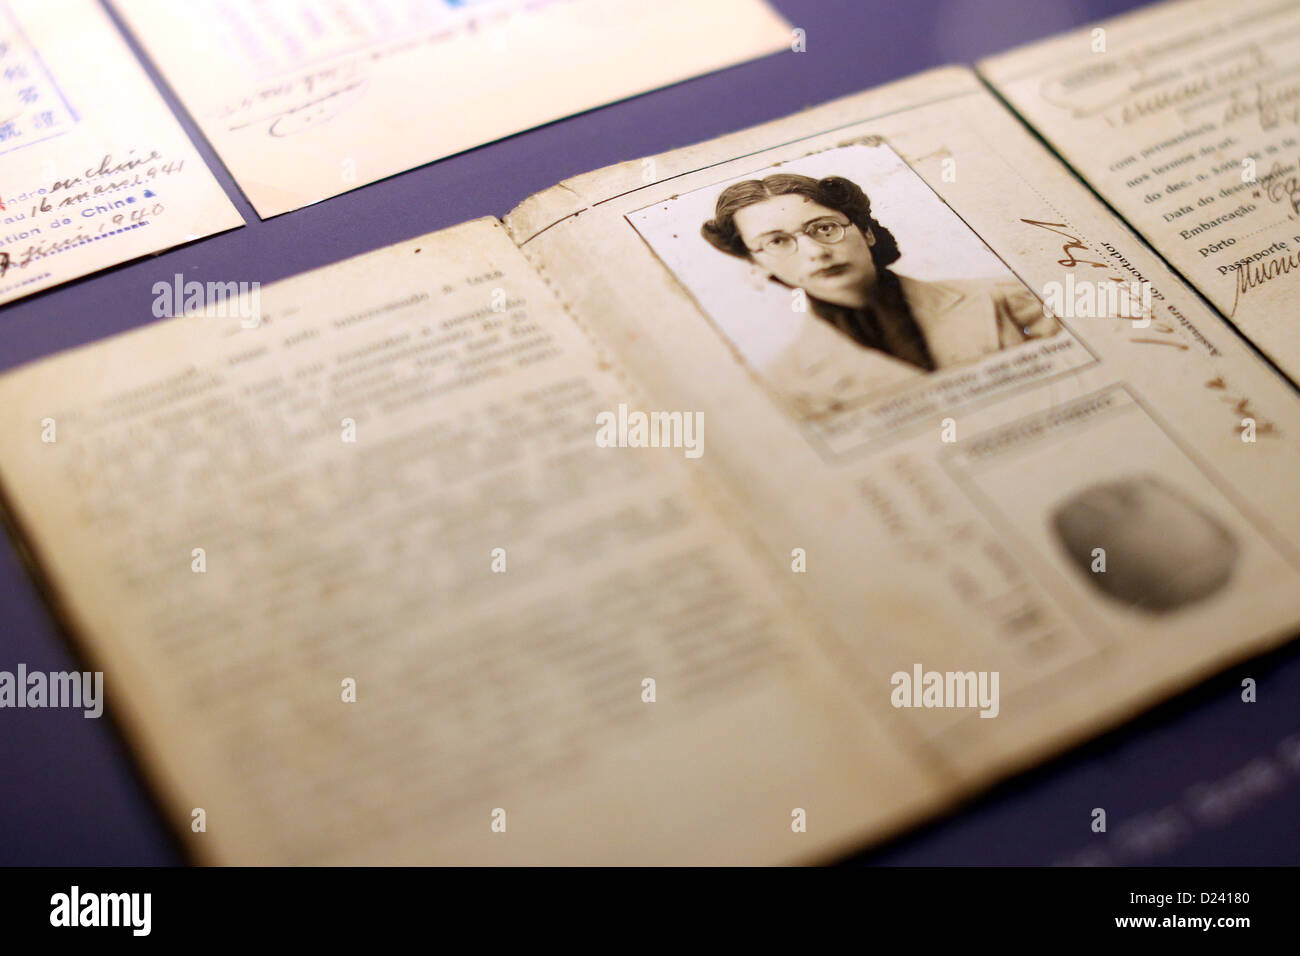 An old passport of Dora Schindel, who is Jewish and escaped from the Nazis in Germany to find refuge in Switzerland in 1937 and later in Brazil, lies on a table during a press date for the exhibition 'I am a Stranger to those People there' (Fremd bin ich den Menschen dort) at Buddenbrookhaus in Luebeck, Germany, 11 January 2013. The exhibition shows 16 biographies of mostly unknown persons from the collection of the German Exile Archive from 1933 till 1945. The exhibition will be opened with a soiree on 11 January 2013. Photo: MALTE CHRISTIANS Stock Photo